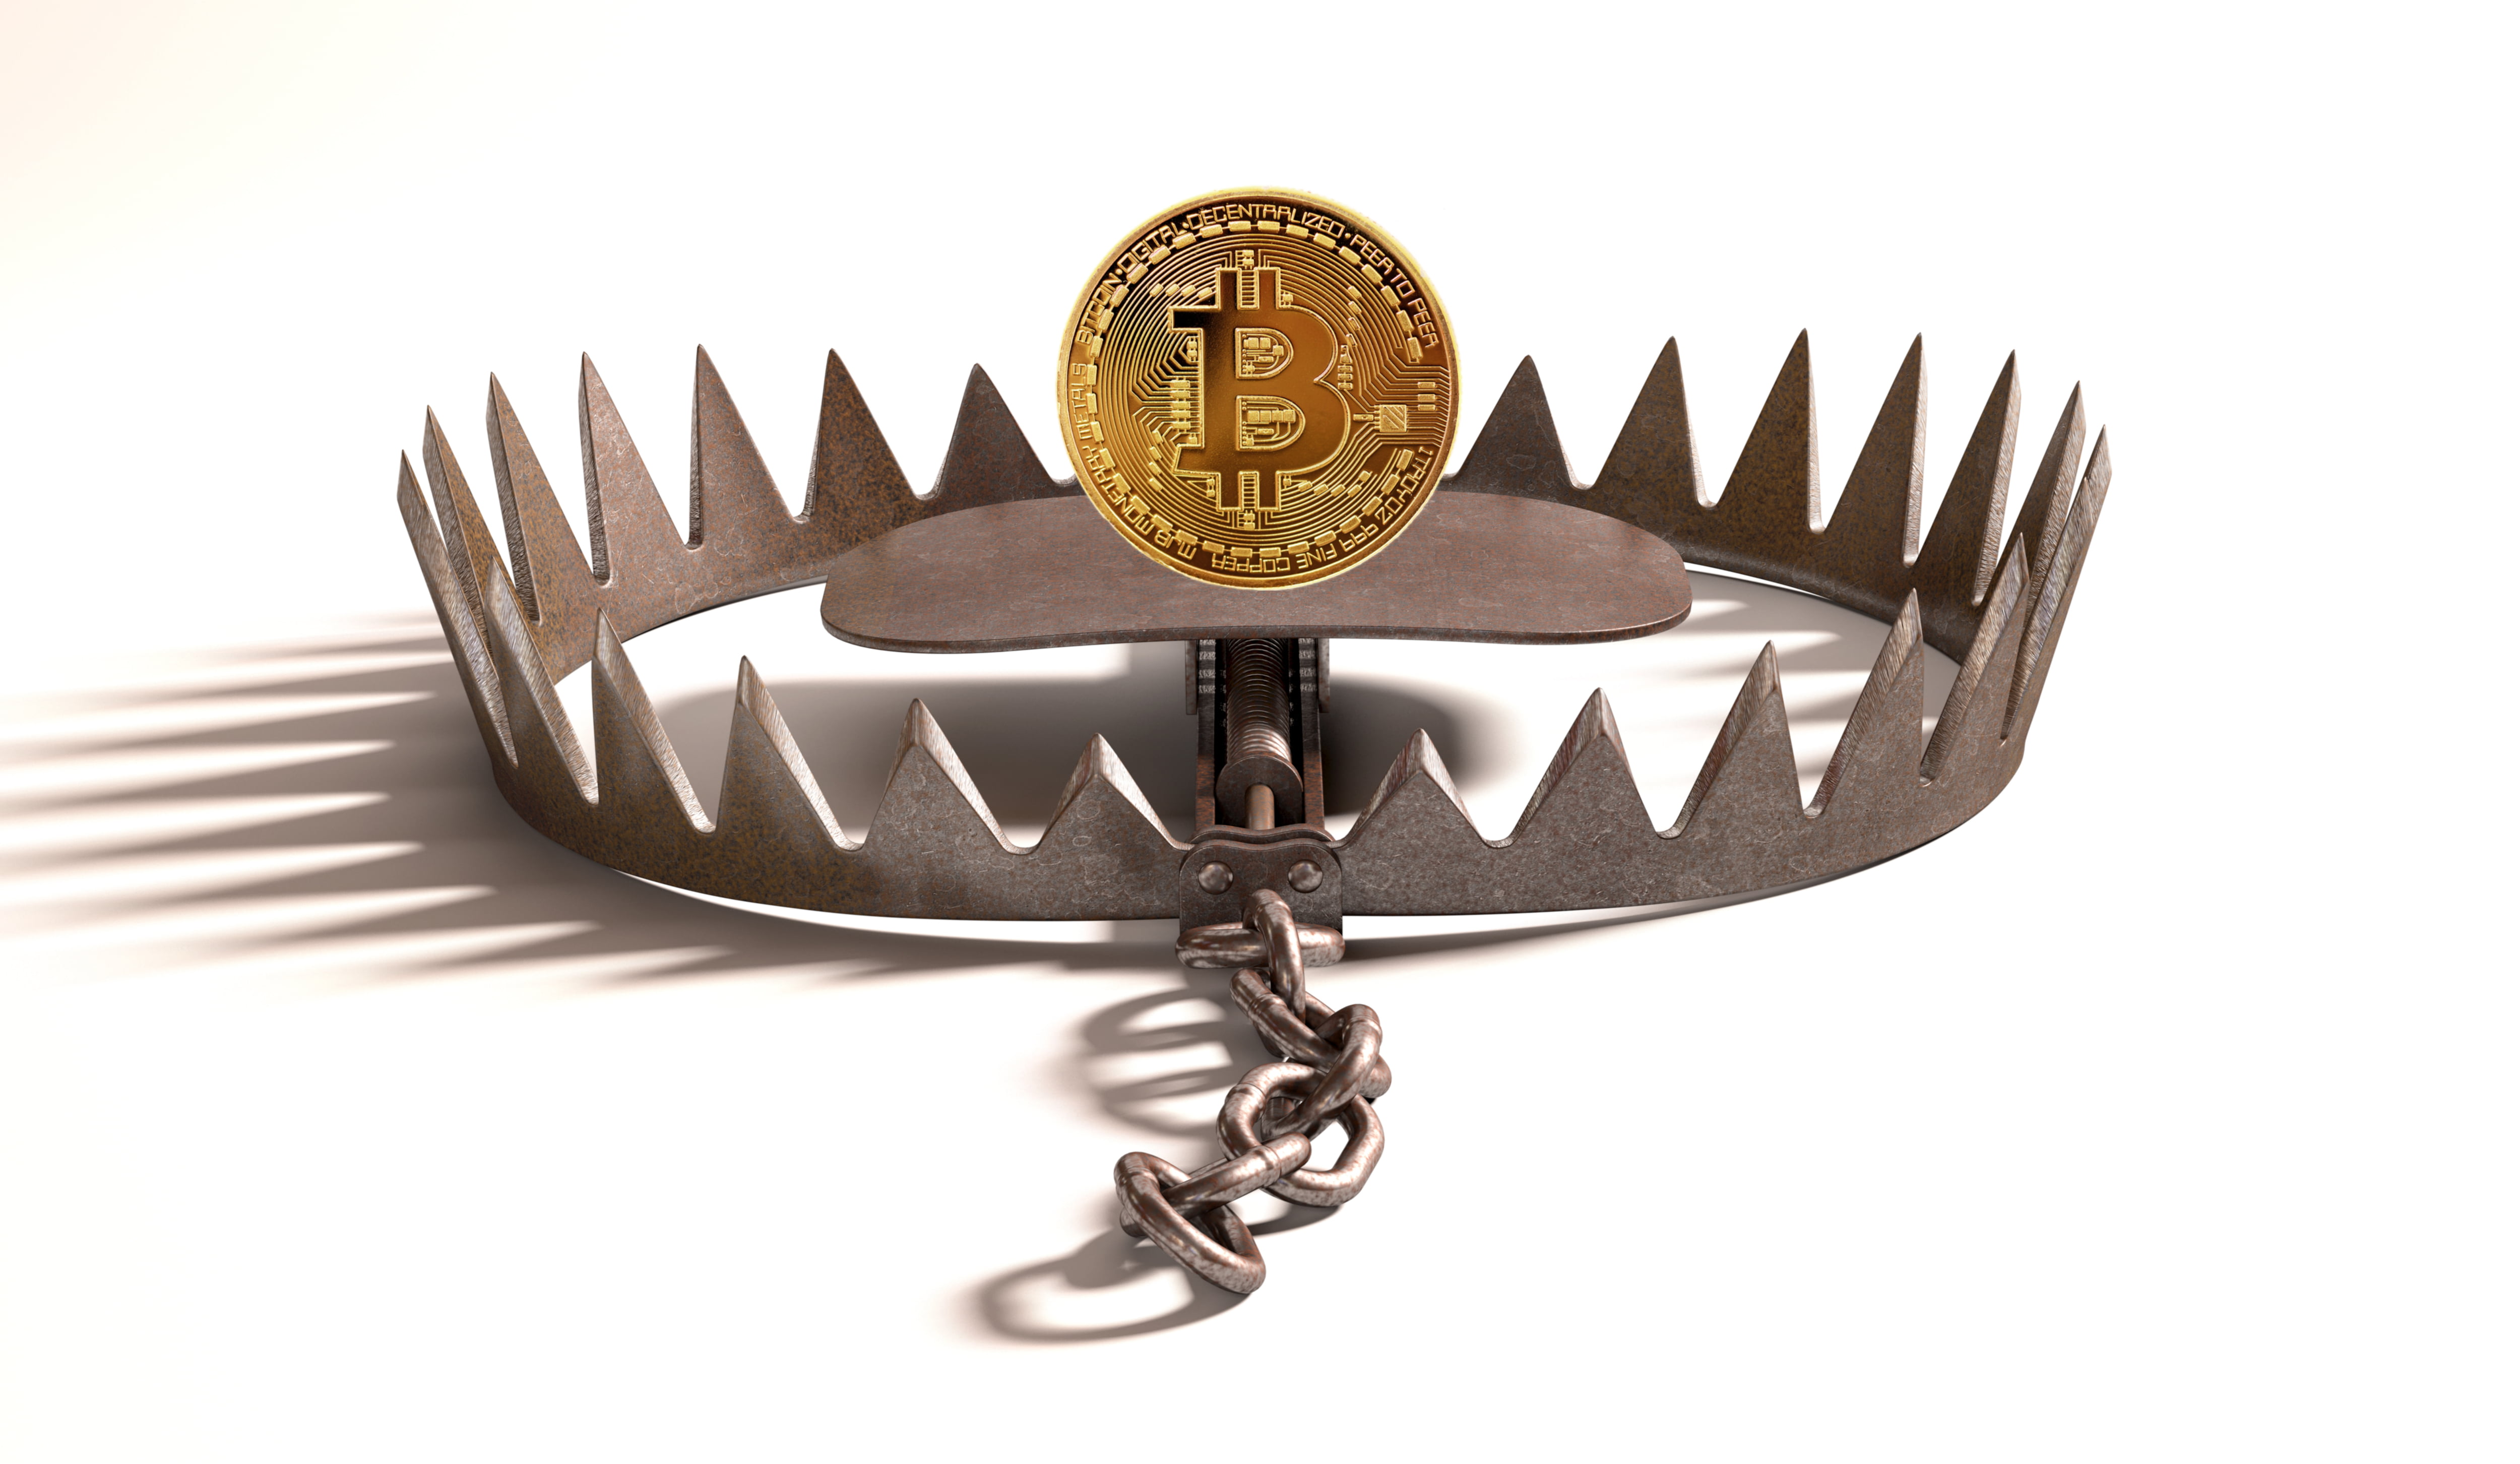 what is a bear trap in crypto